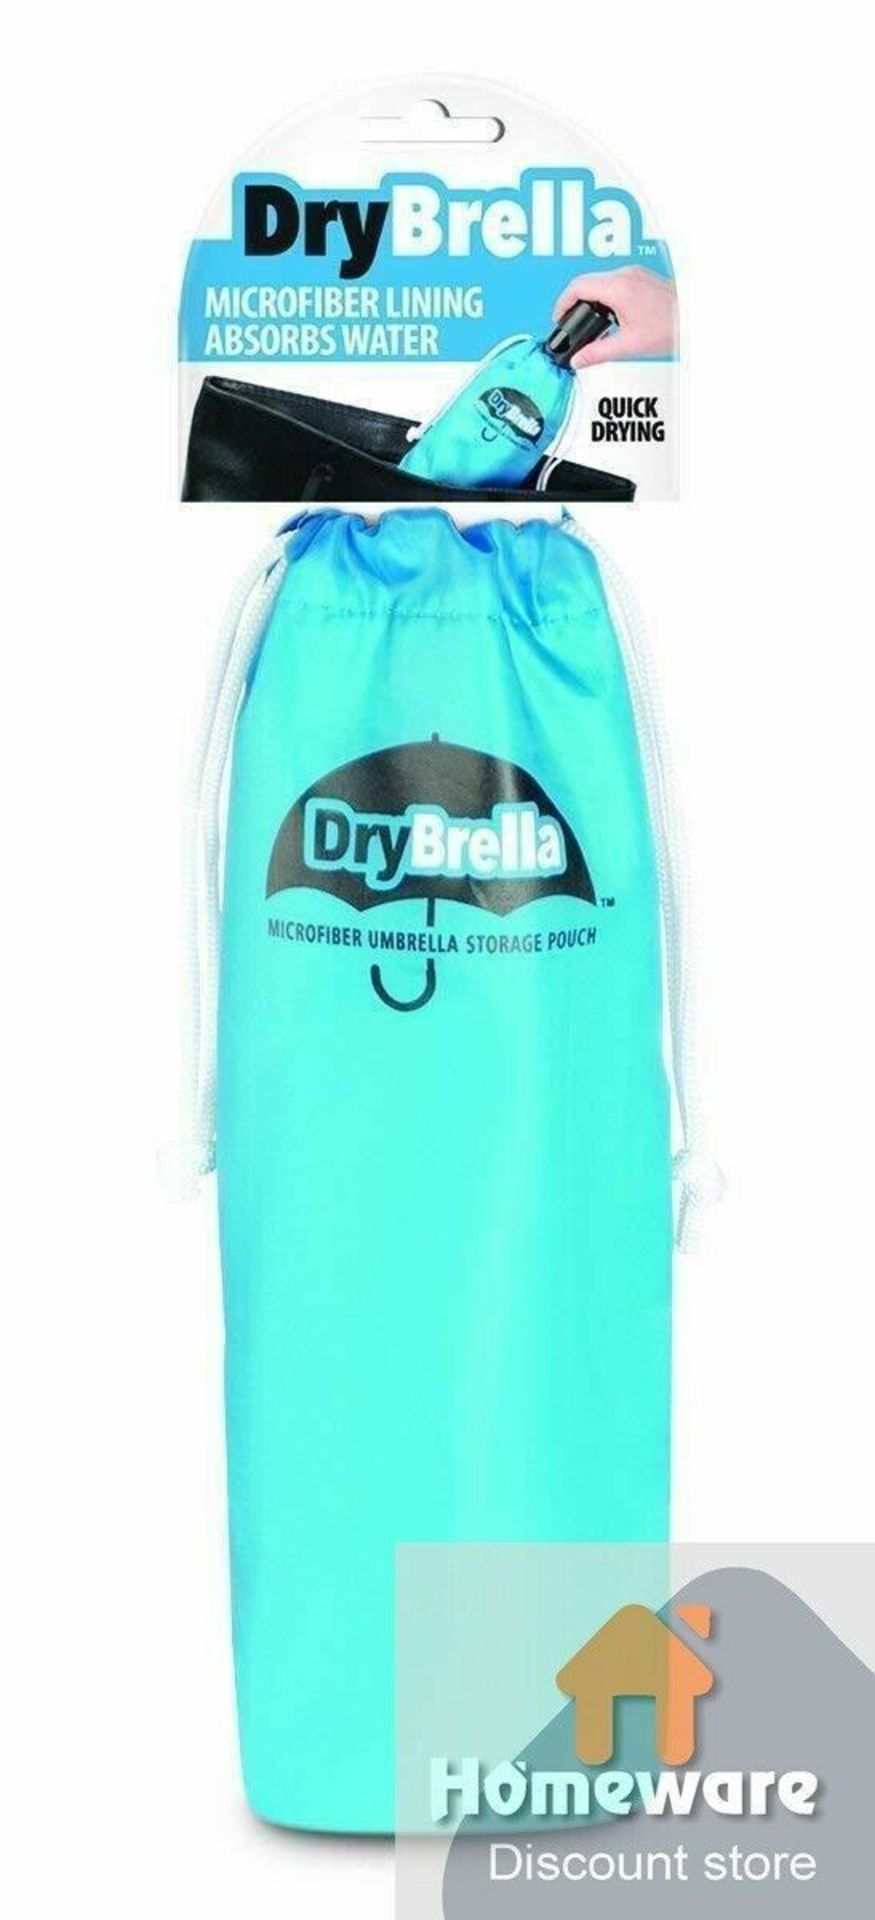 15 X BRAND NEW DRY BELLA MICRO-FIBRE WATER ABSORBING LINING WITH QUICK DRY POUCH RRP £12 EACH DB